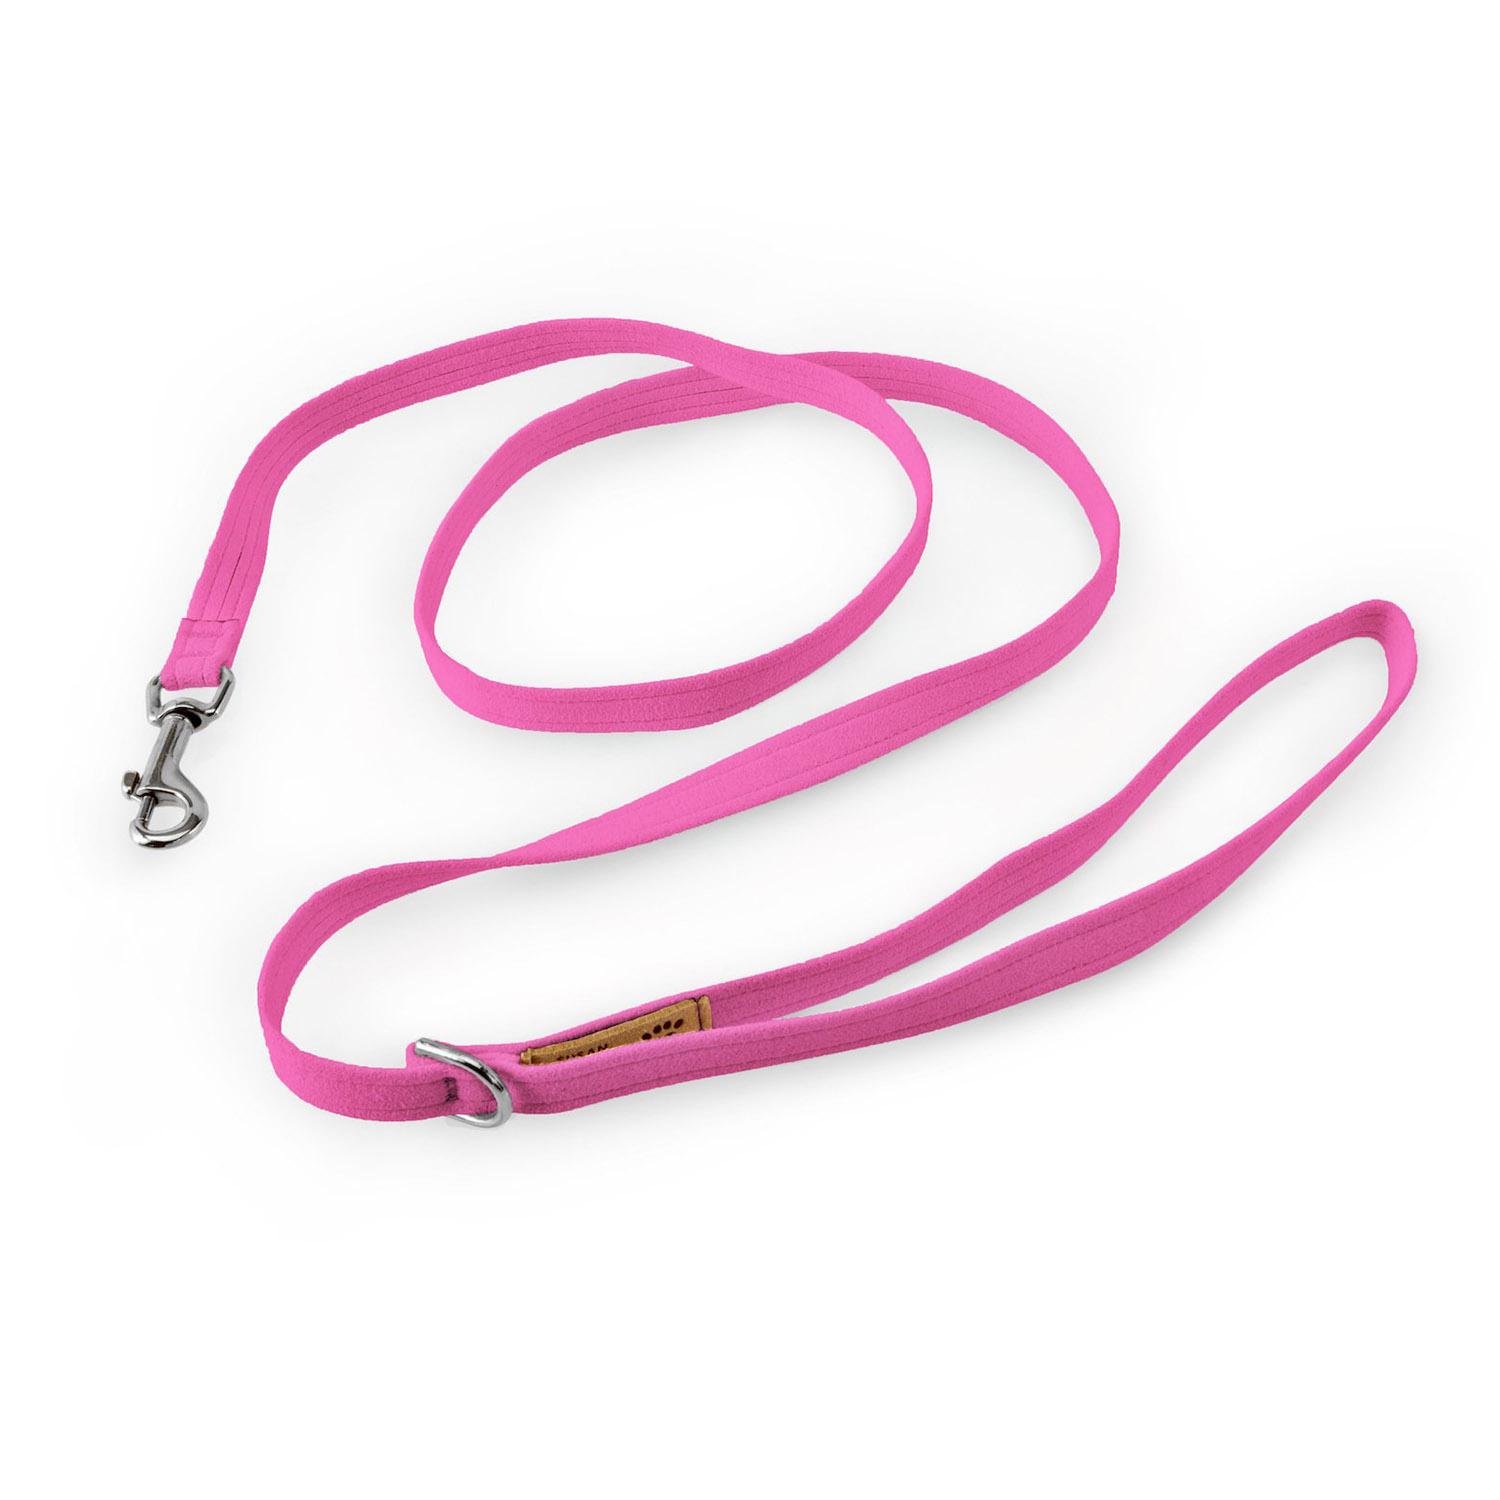 Solid Ultrasuede Dog Leash by Susan Lanci - Sapphire Pink